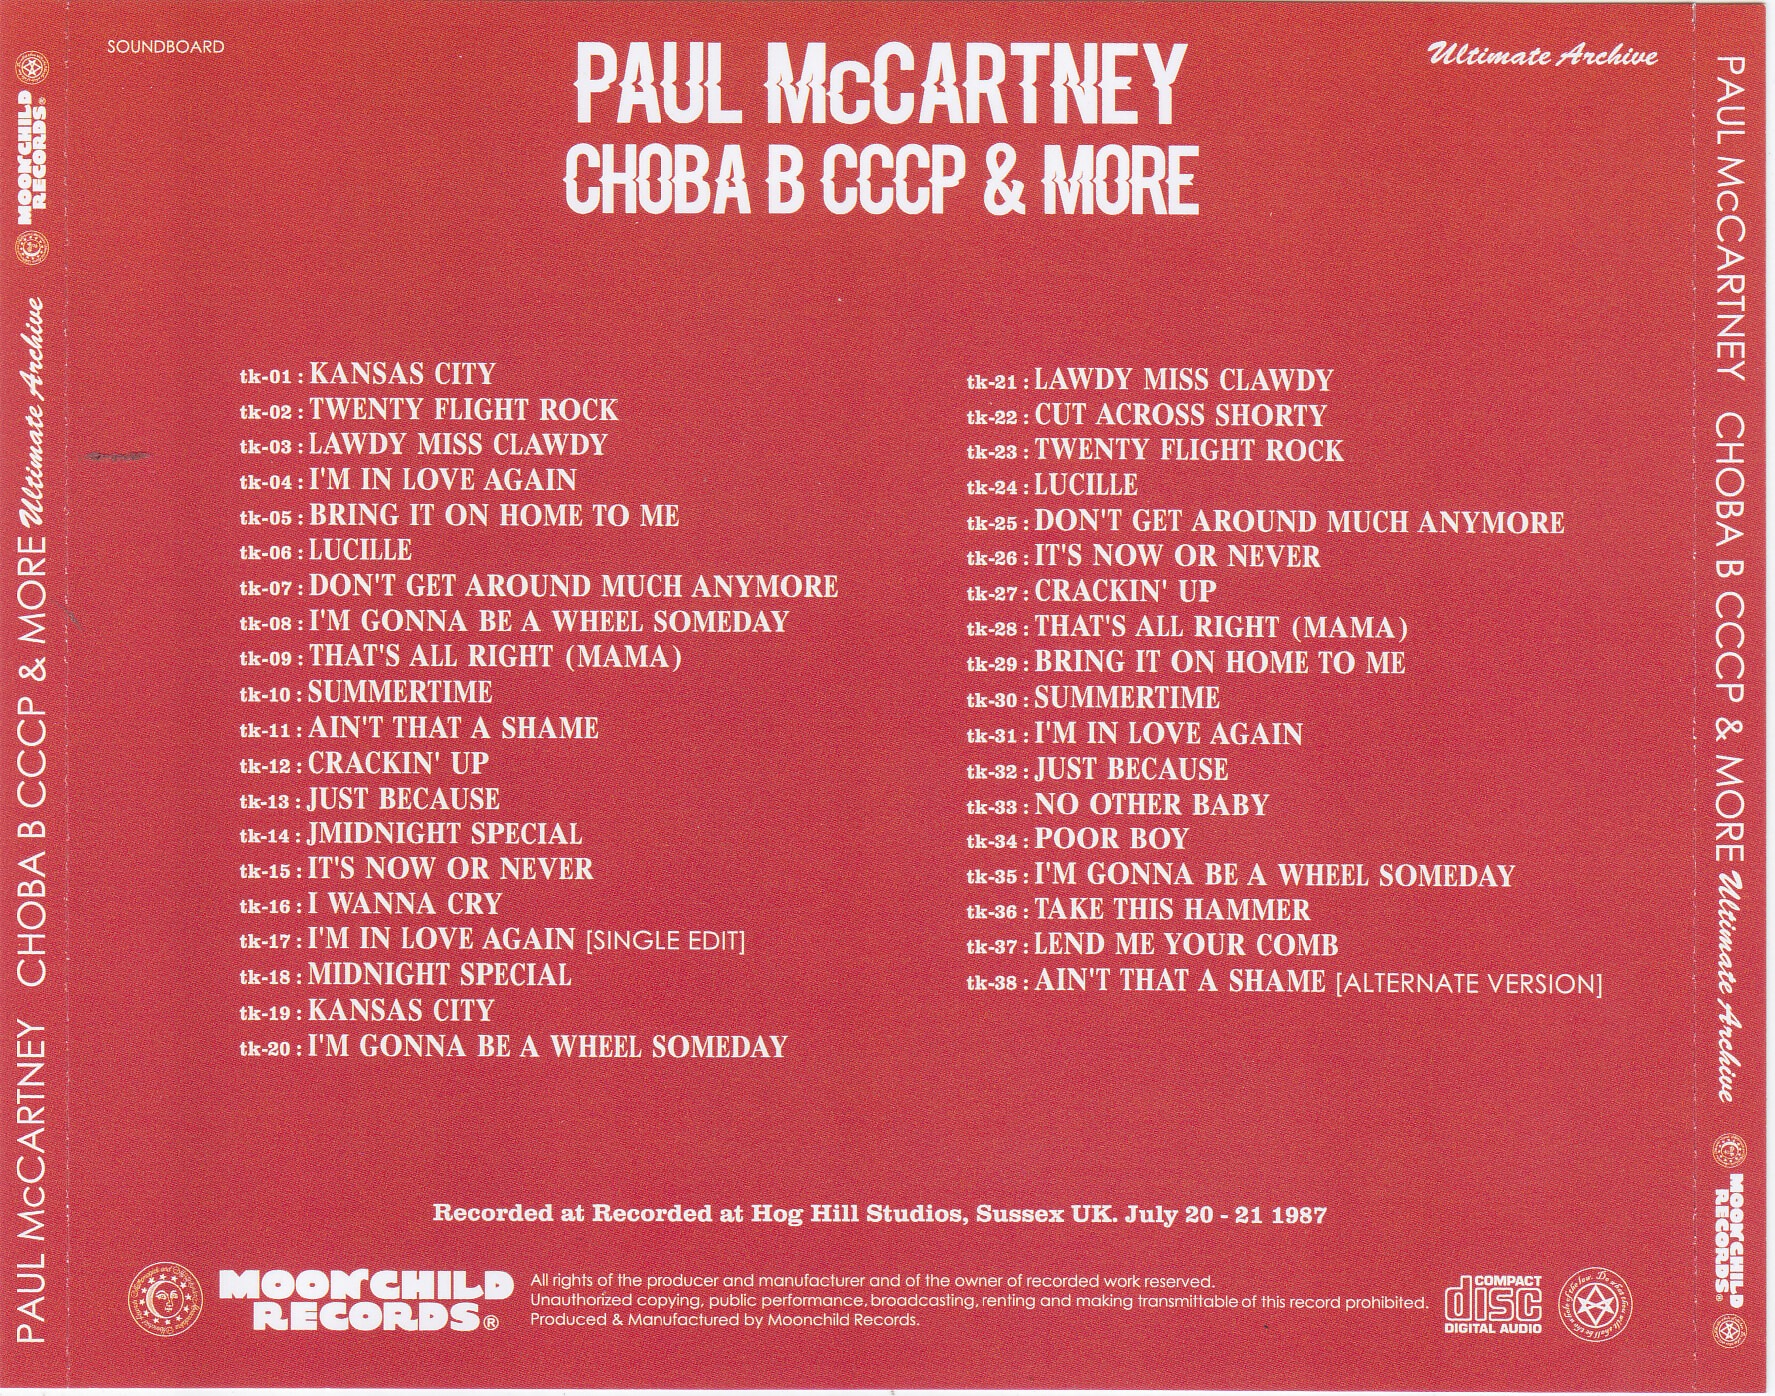 Choba B CCCP by Paul McCartney (CD, Sep-1991, Capitol/EMI Records) for sale  online